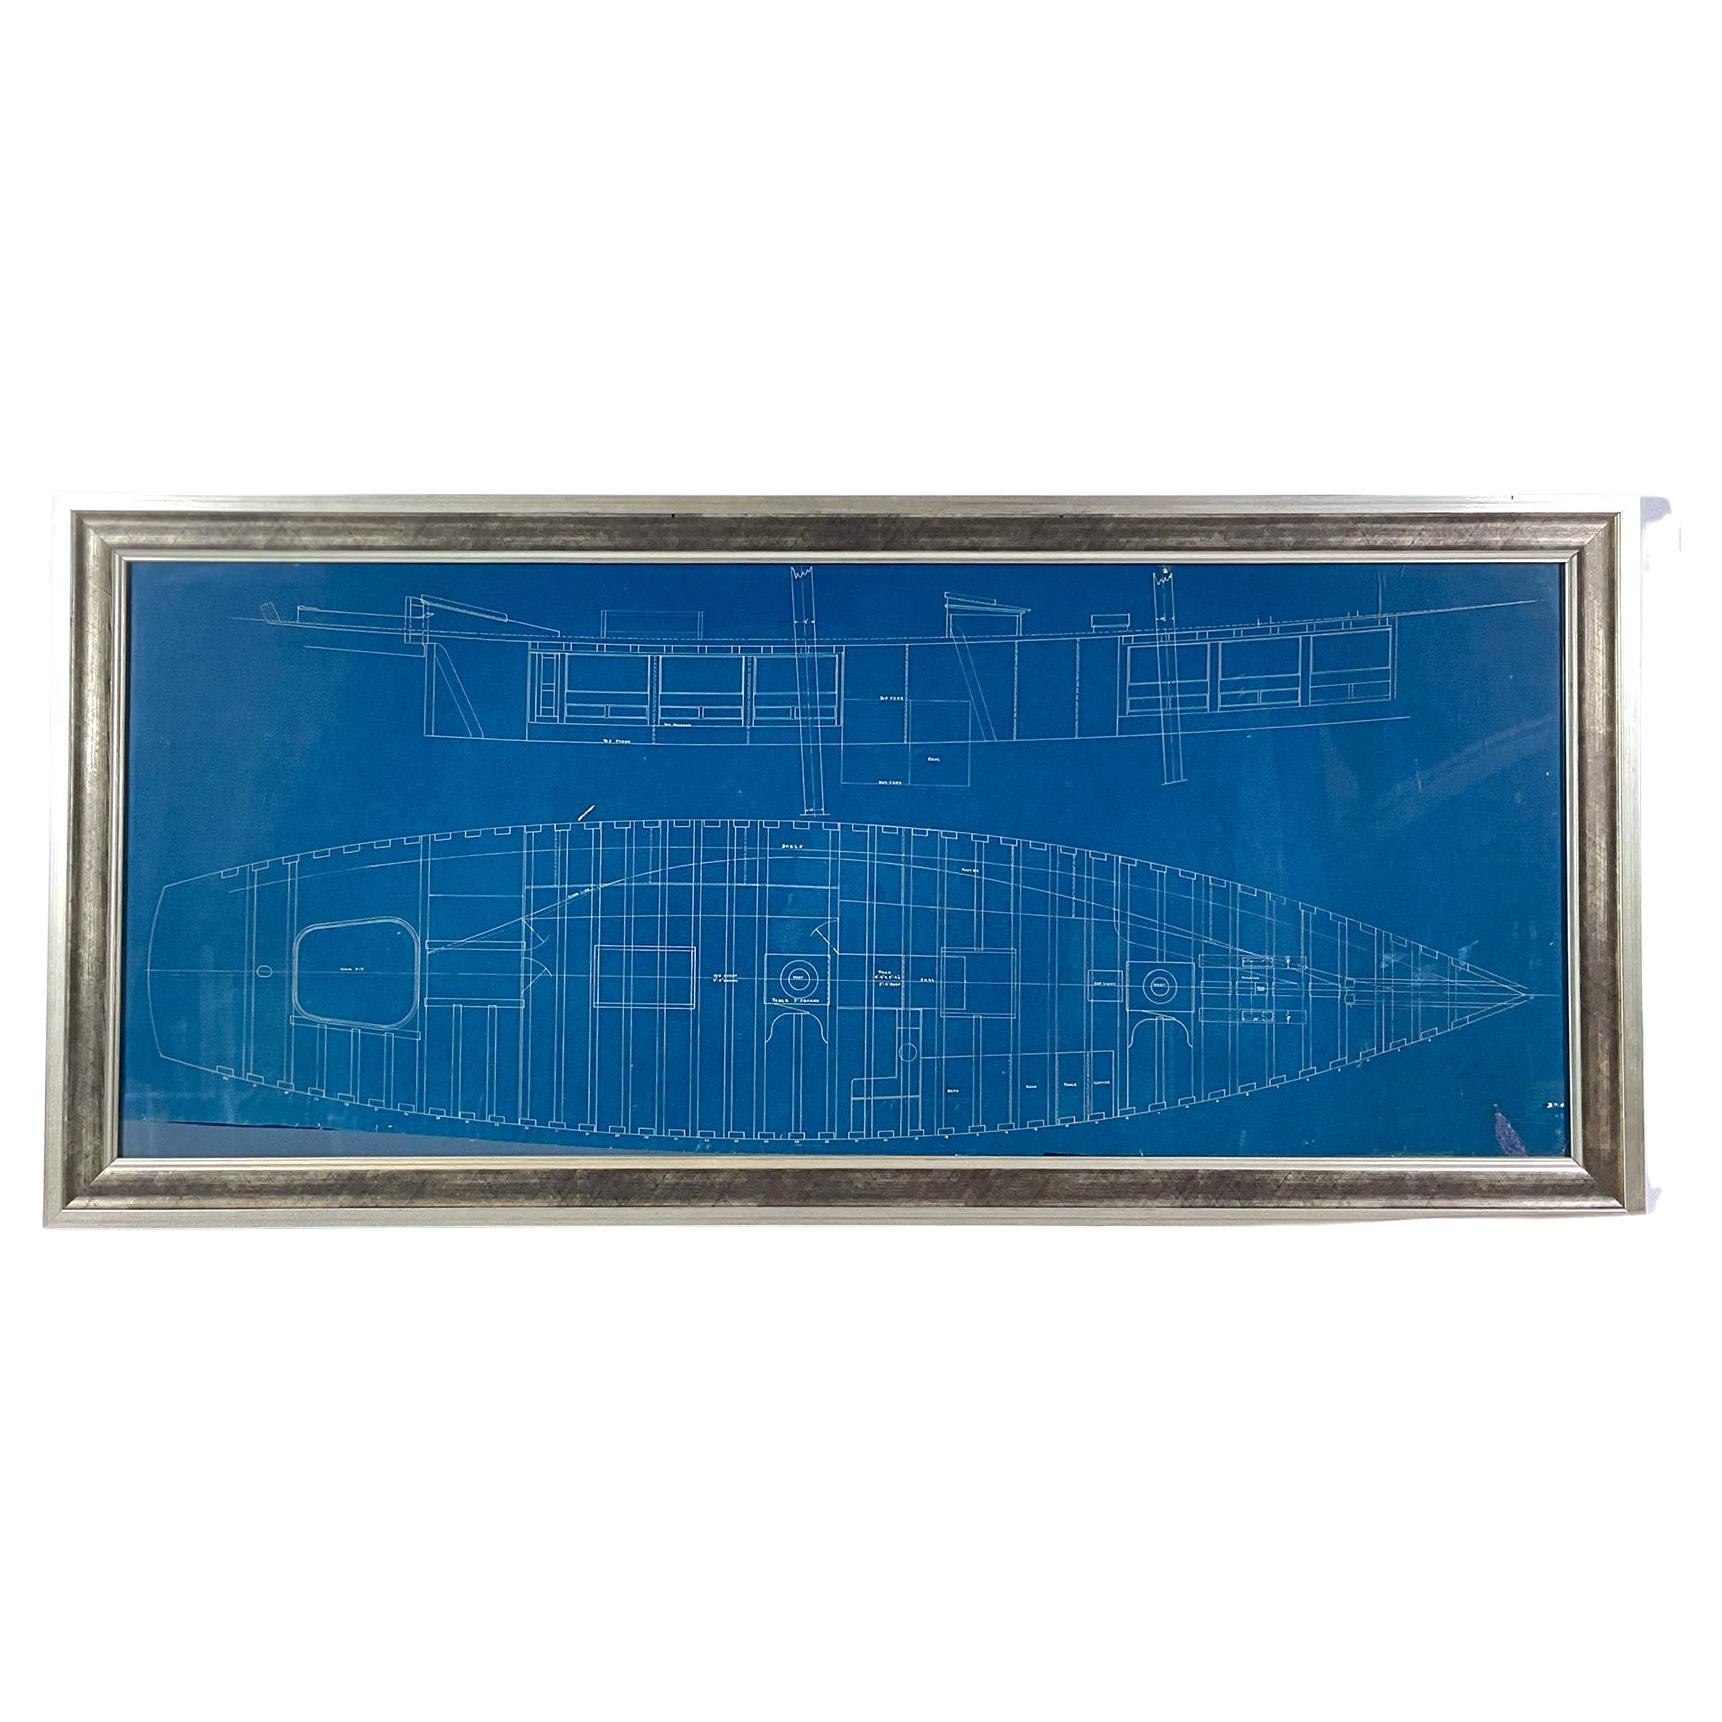 Framing Blueprint For The Yacht "Columbia" For Sale